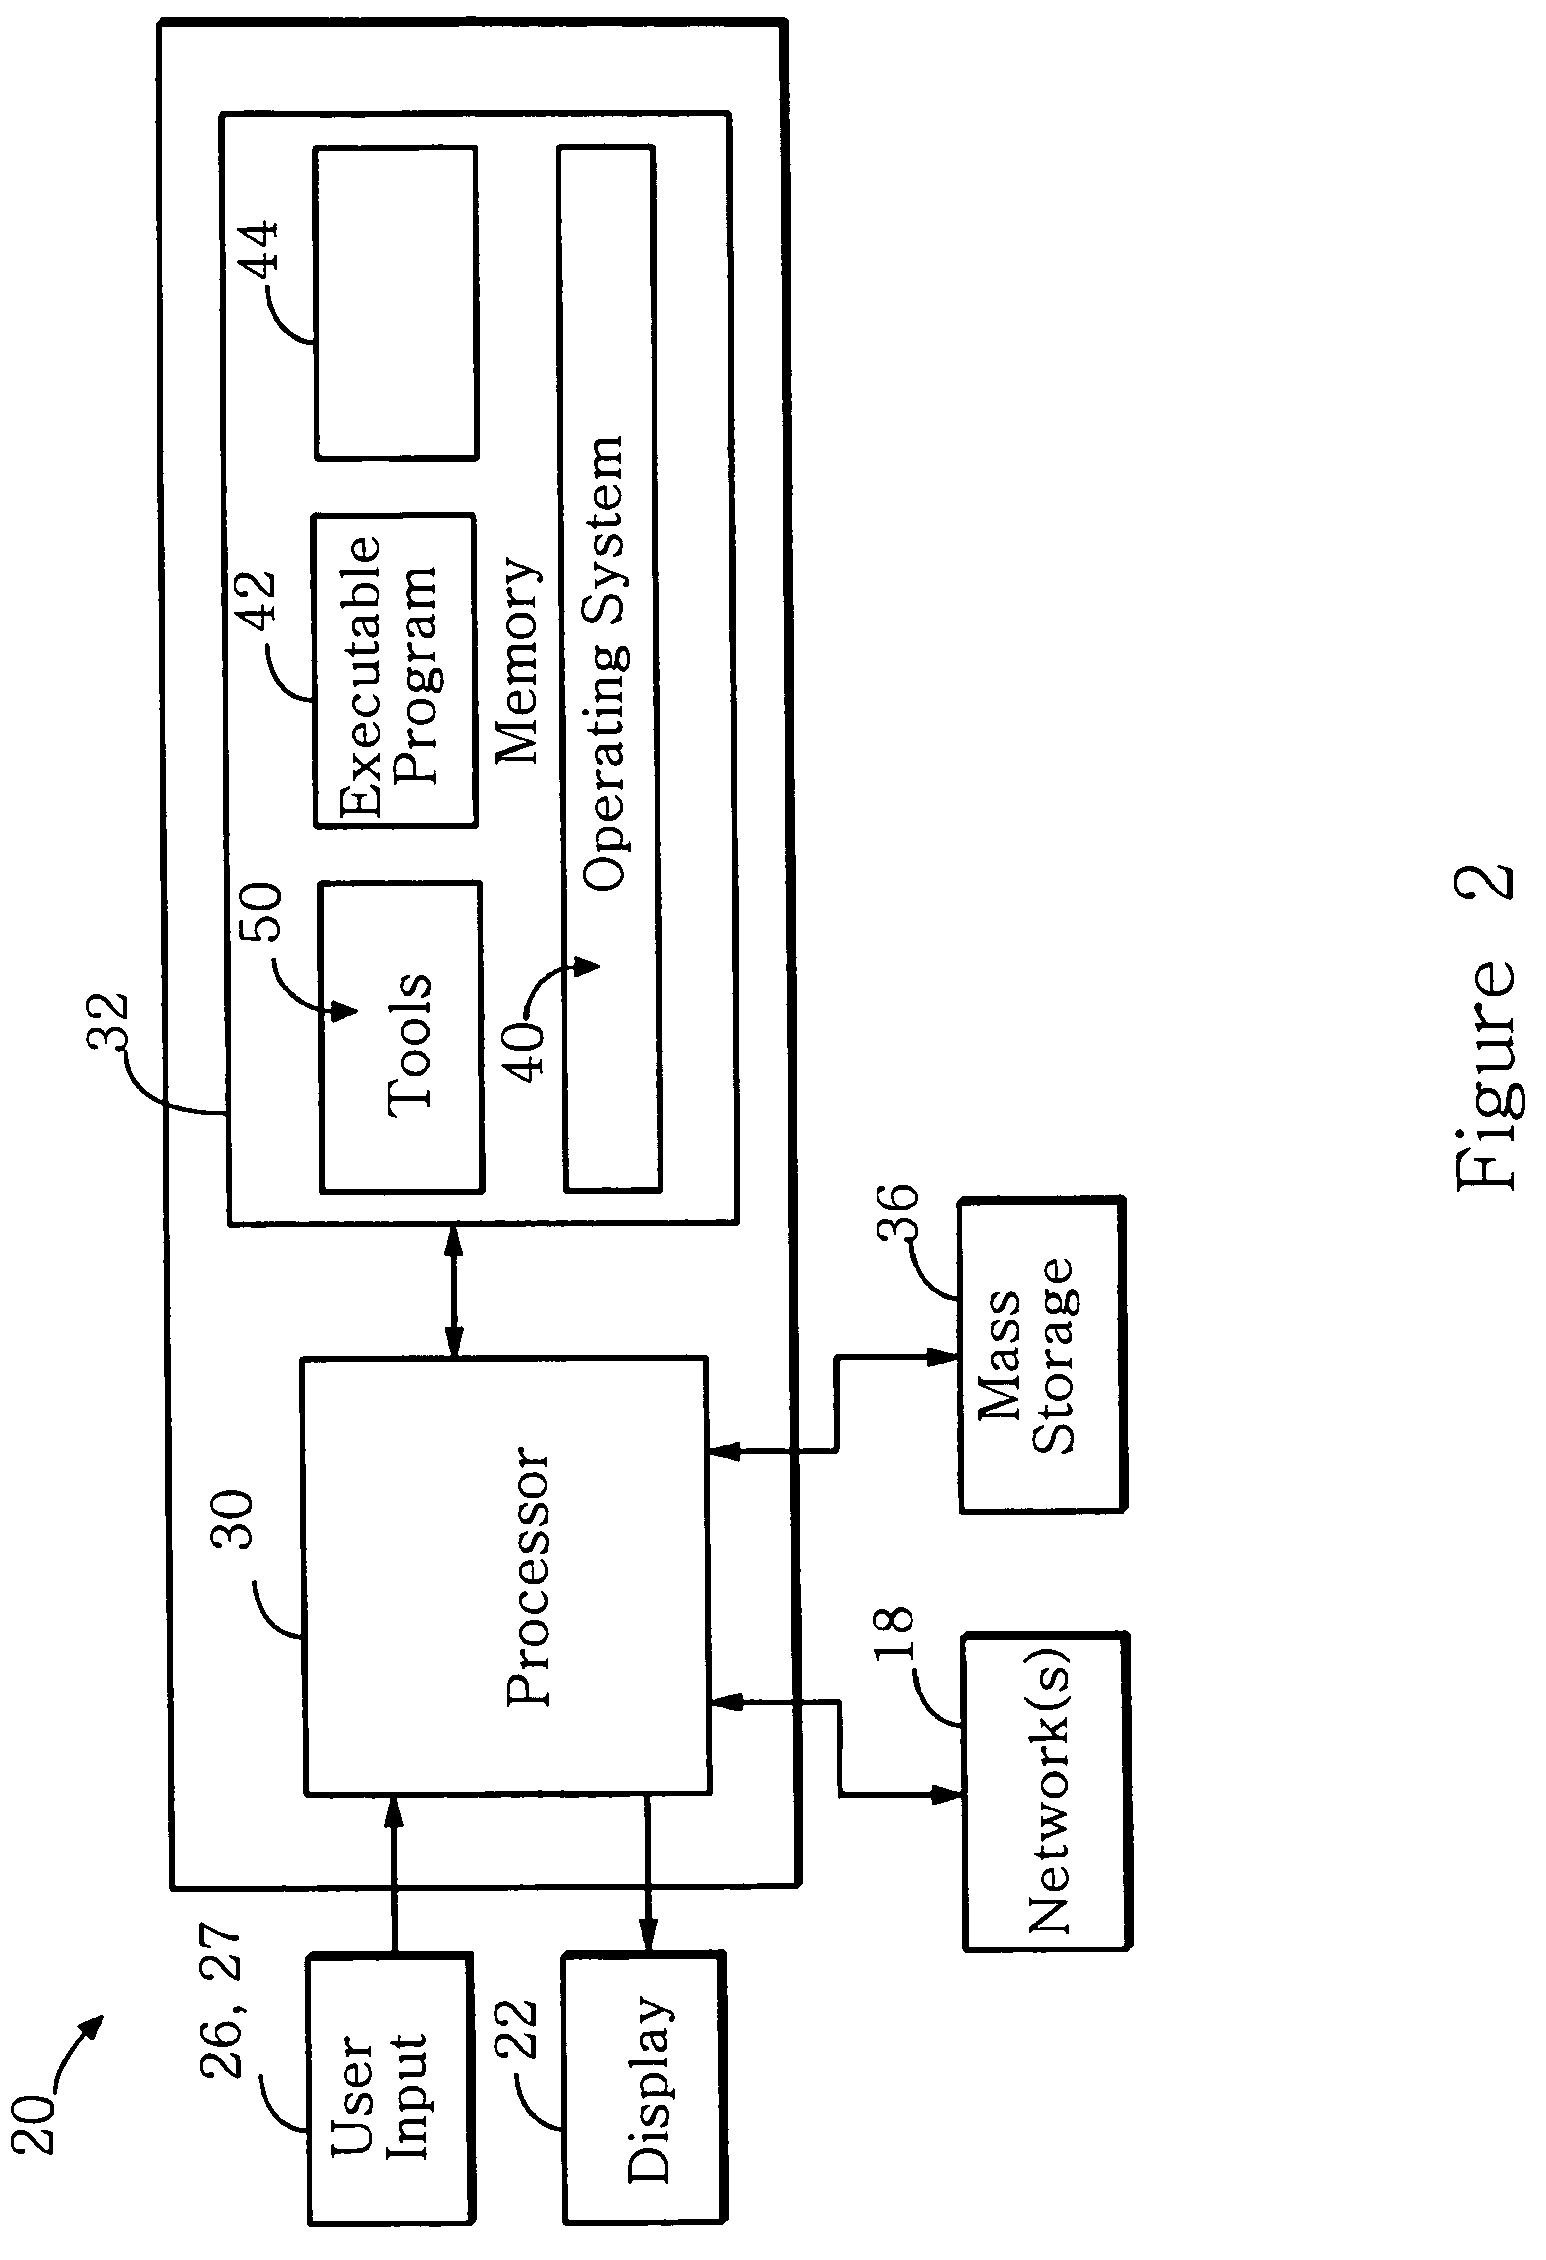 Flexible design for memory use in integrated circuits